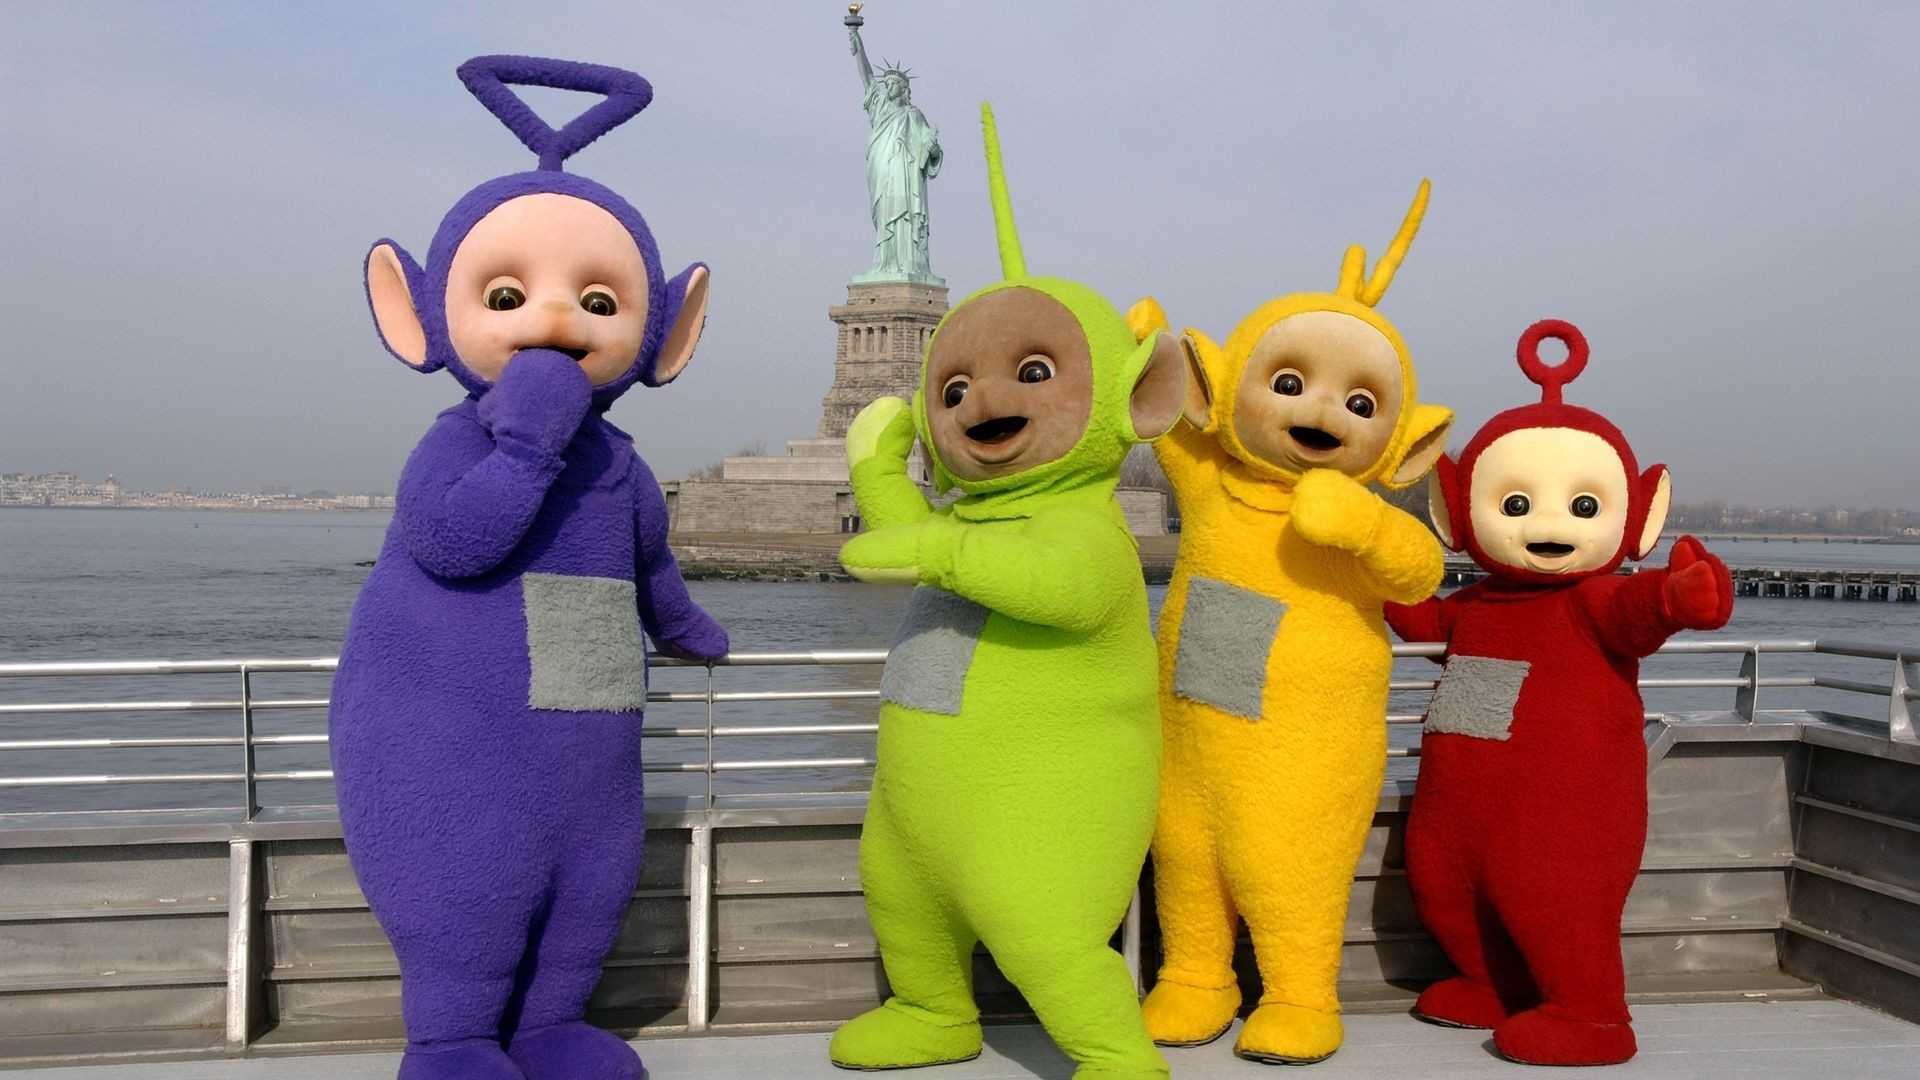 Thicc lady teletubbies